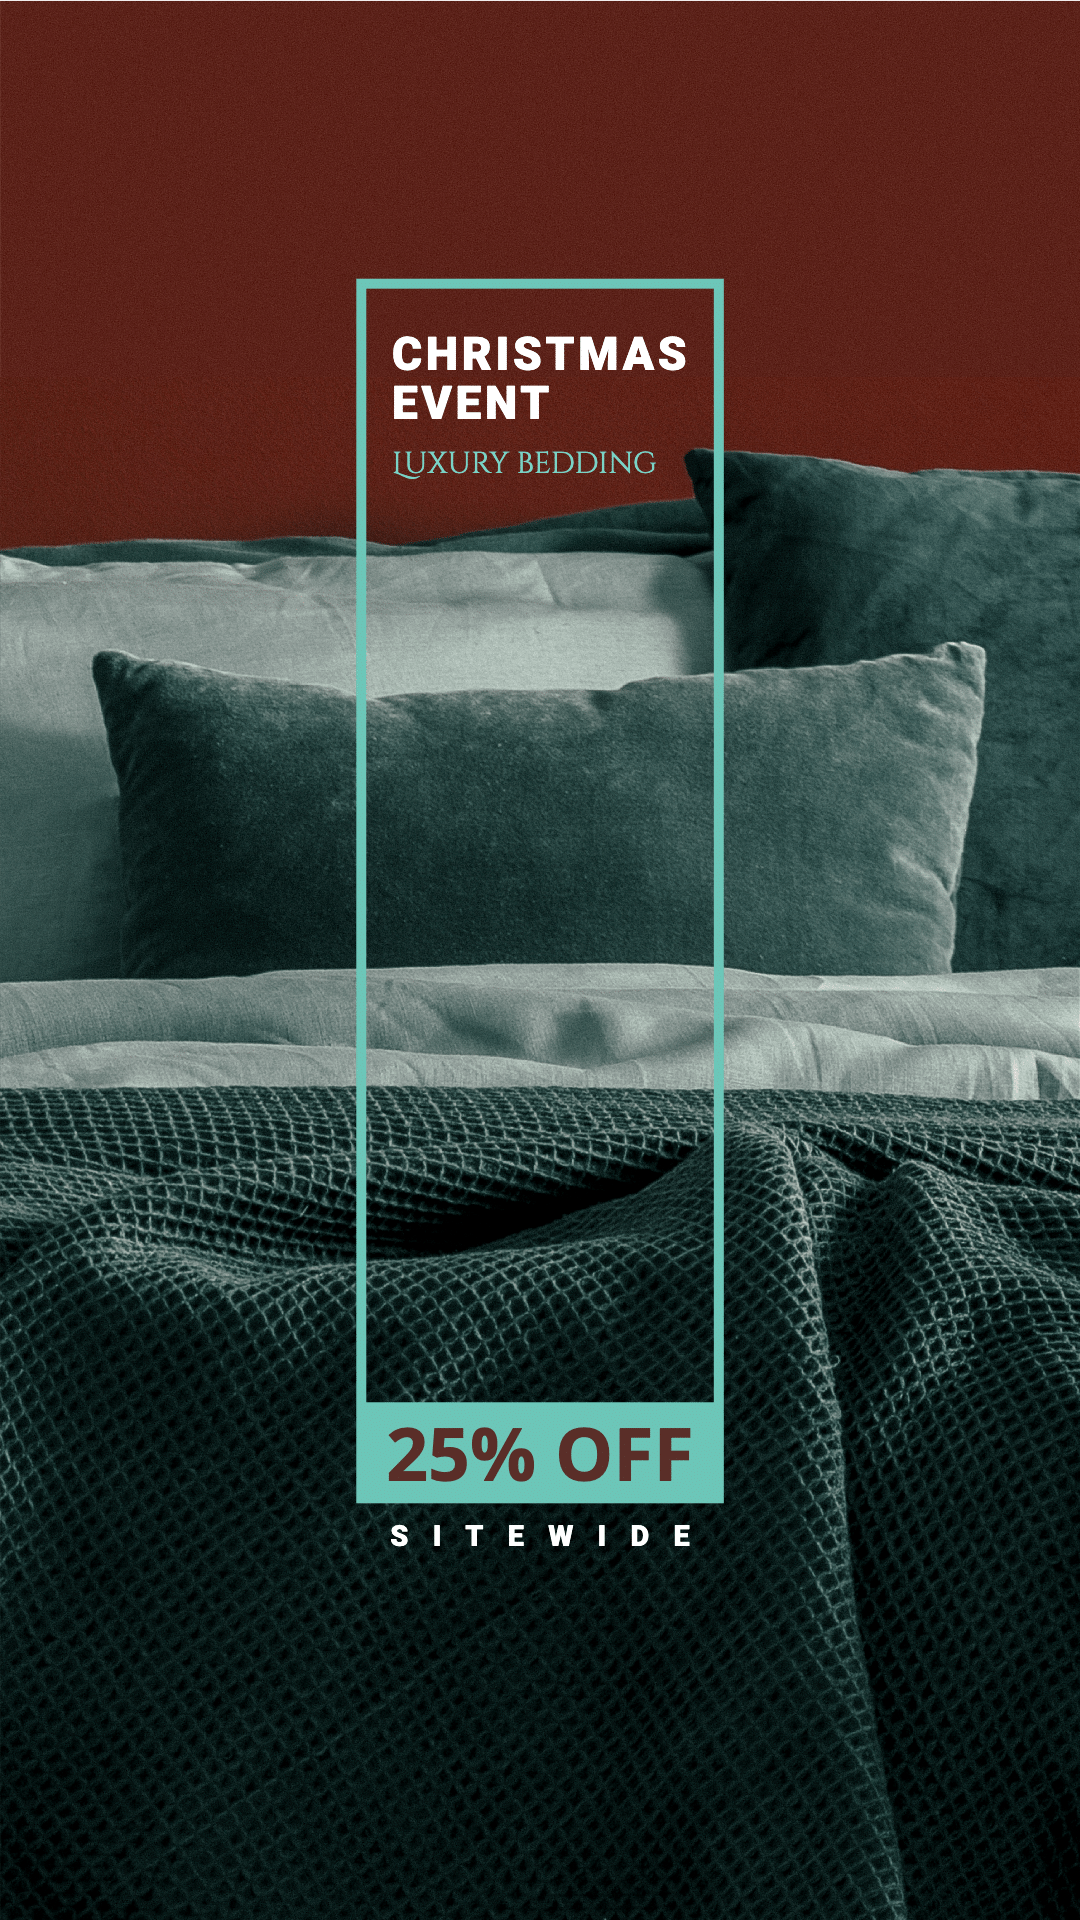 Green Rectangle Element Luxury Bedding Christmas Promotion Ecommerce Story预览效果